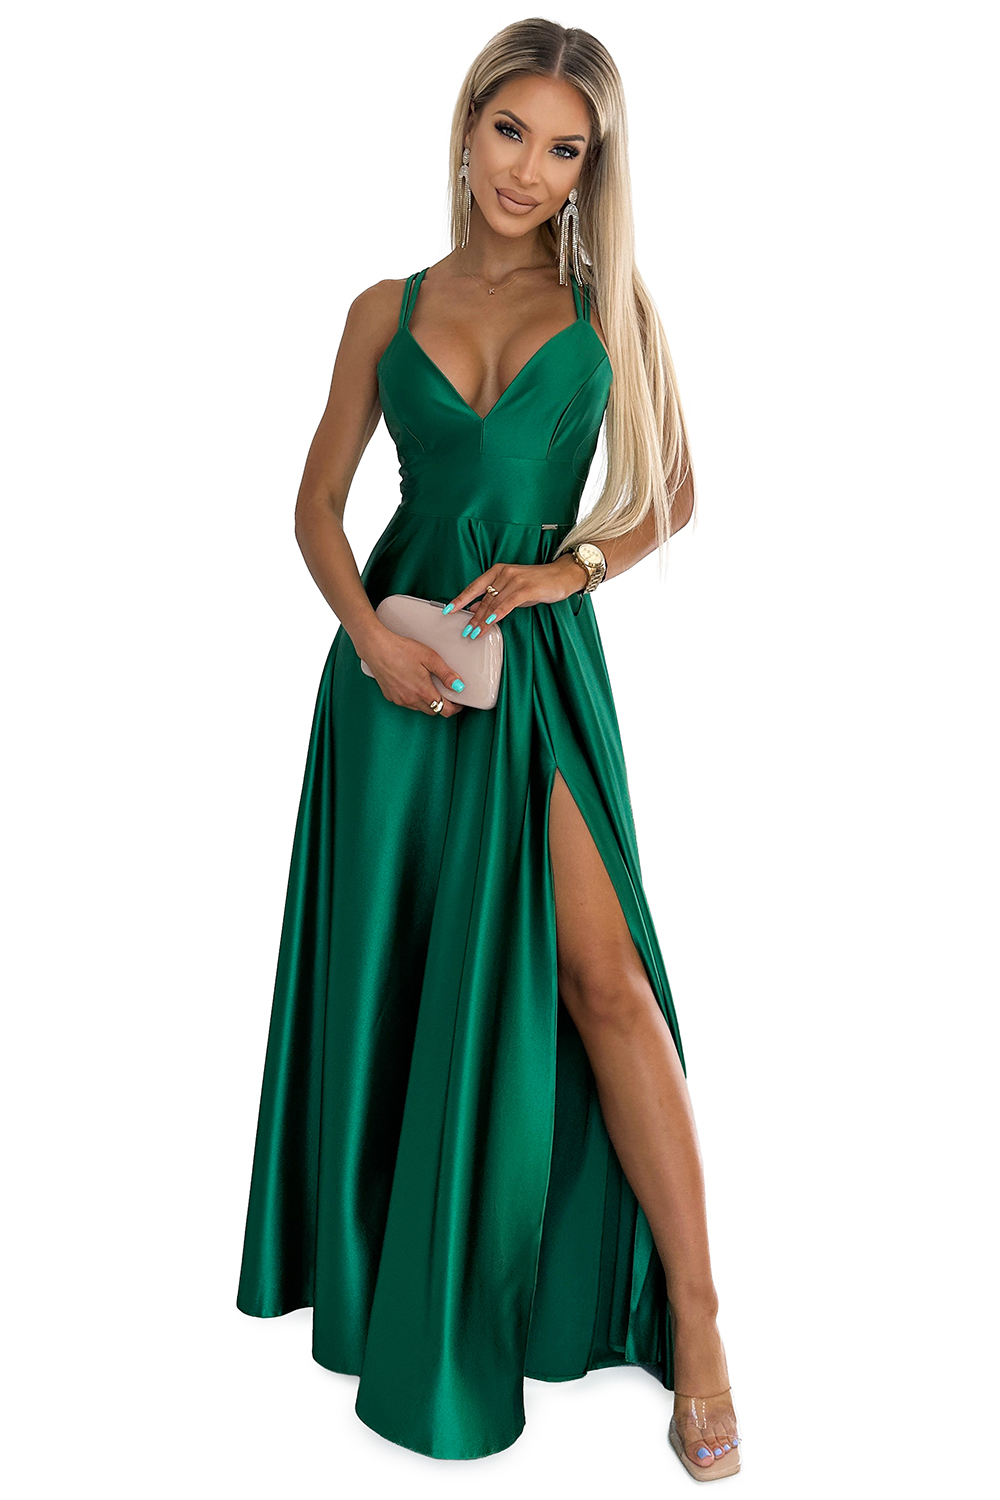 Elegant long satin dress with a neckline and crossed straps Numoco